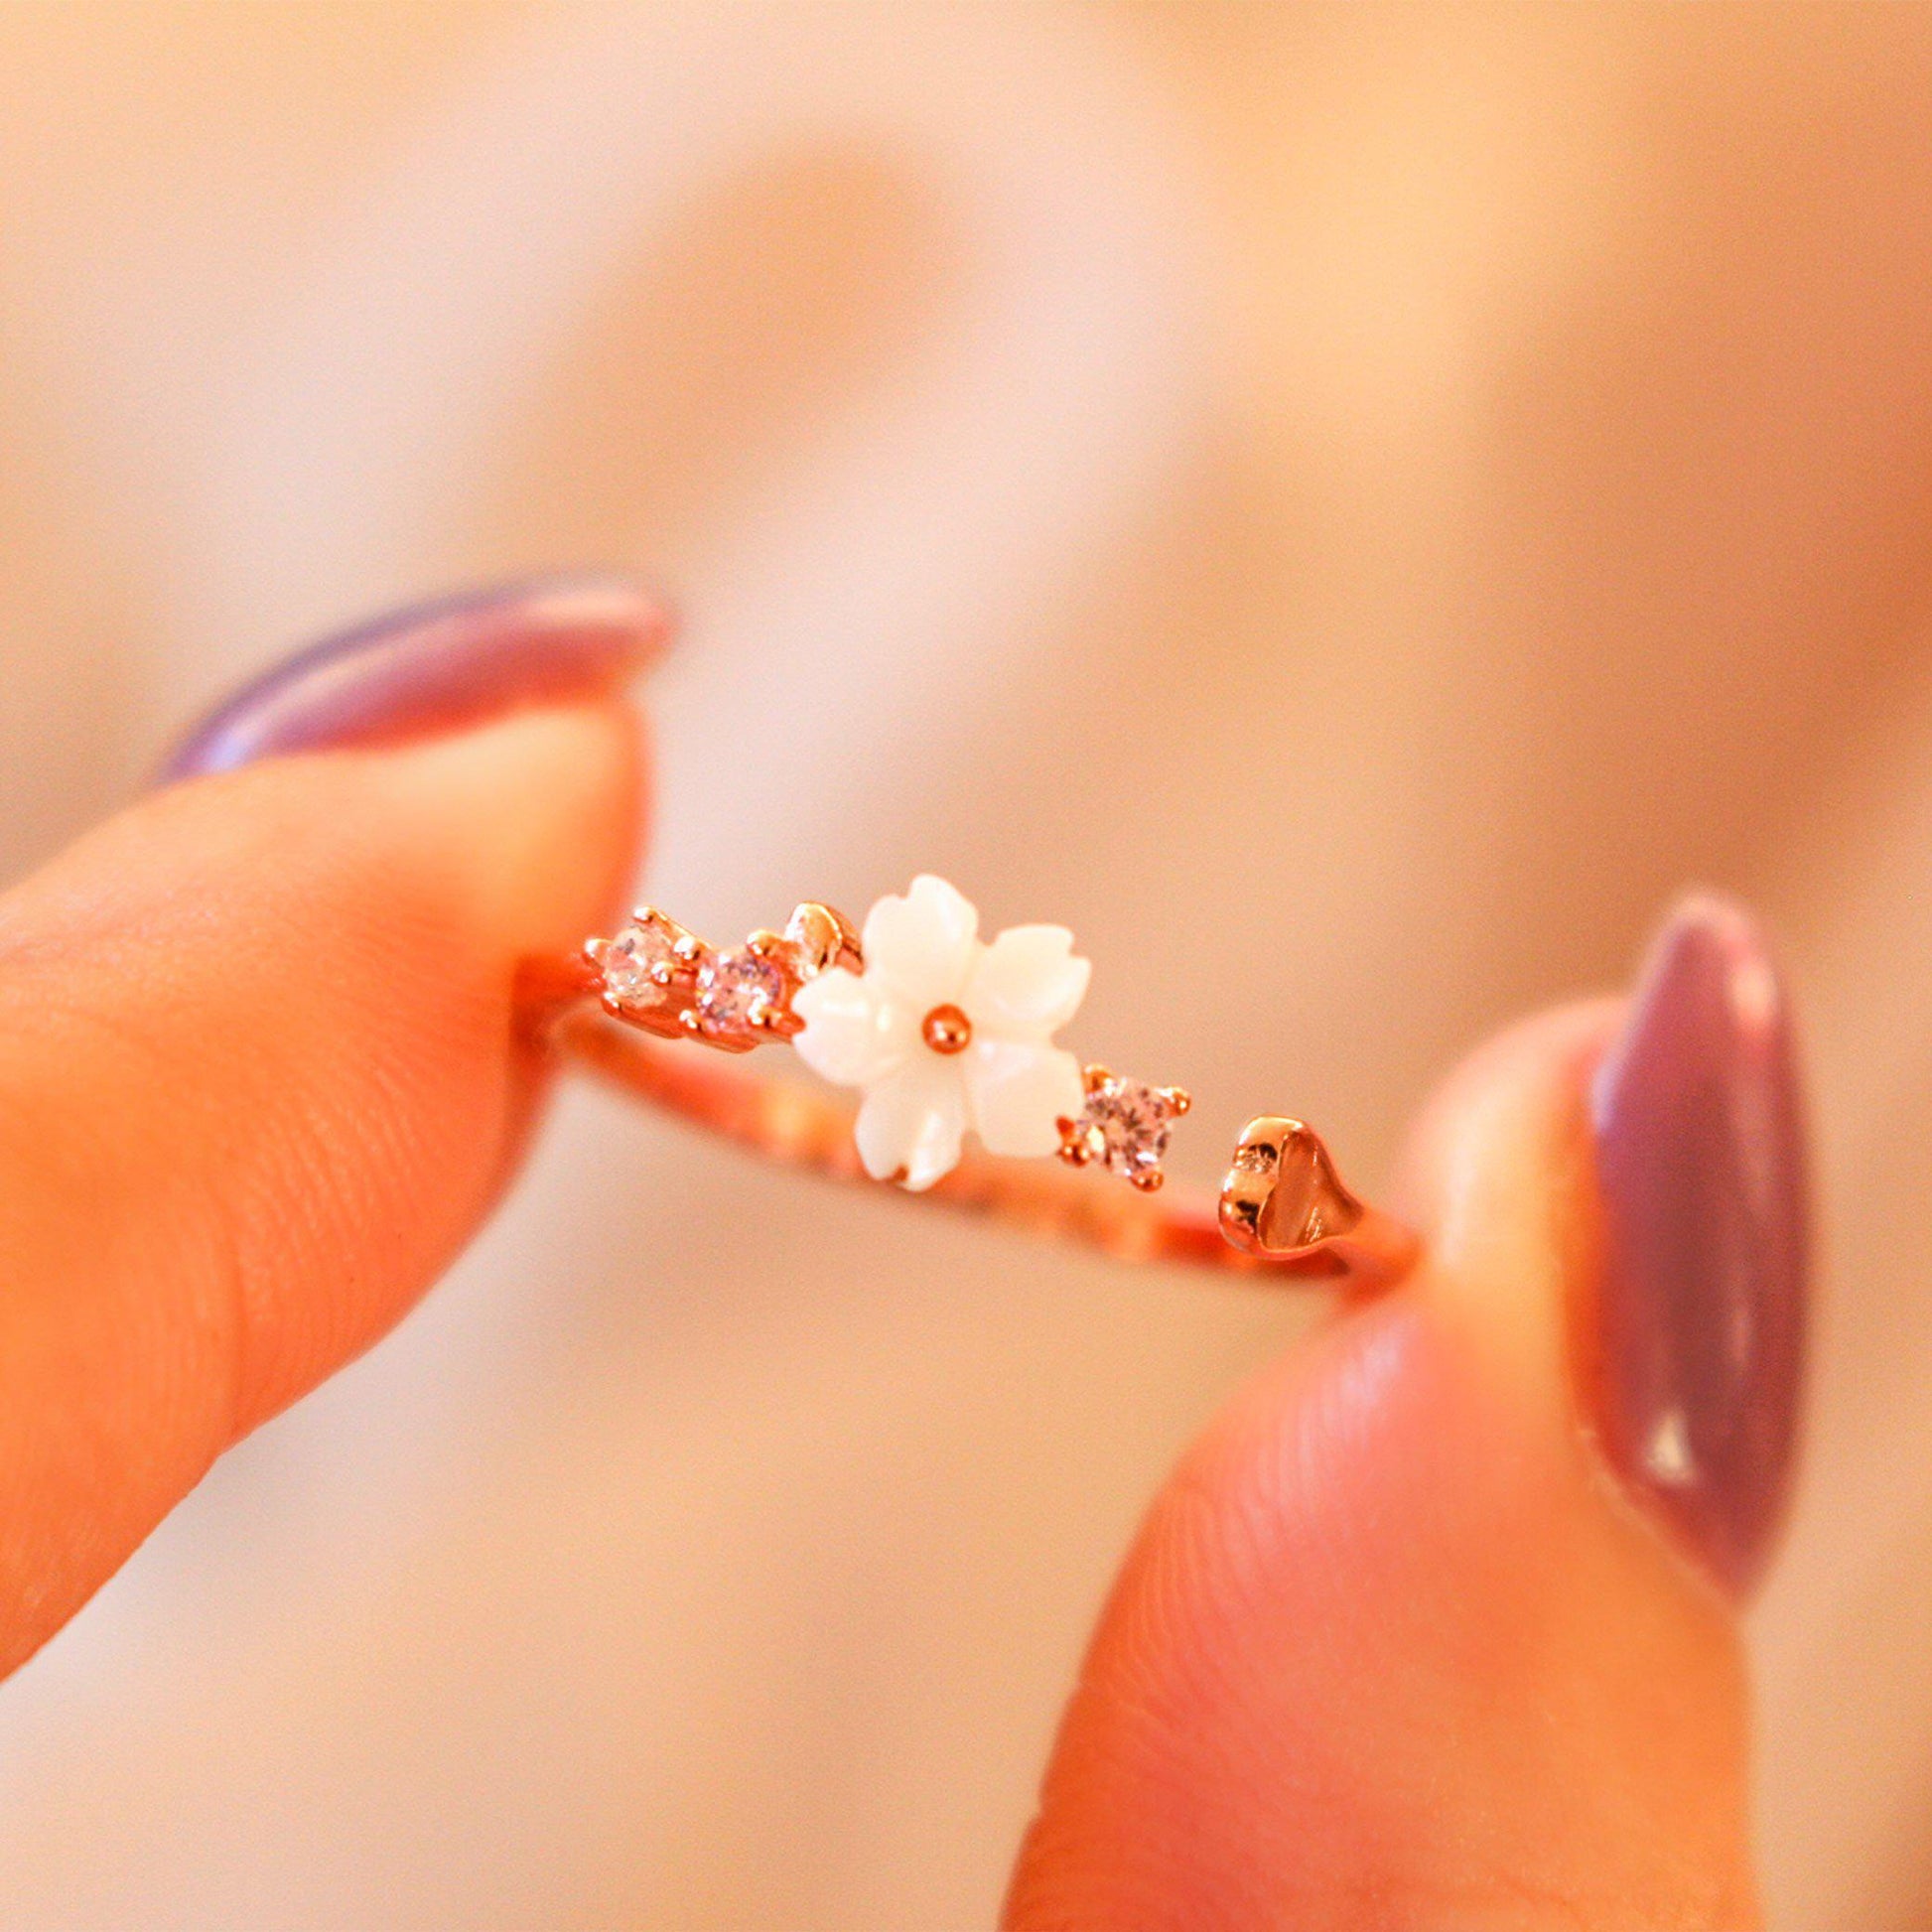 Cherry Blossom Ring, Flower Ring, Adjustable Ring, Stackable Ring